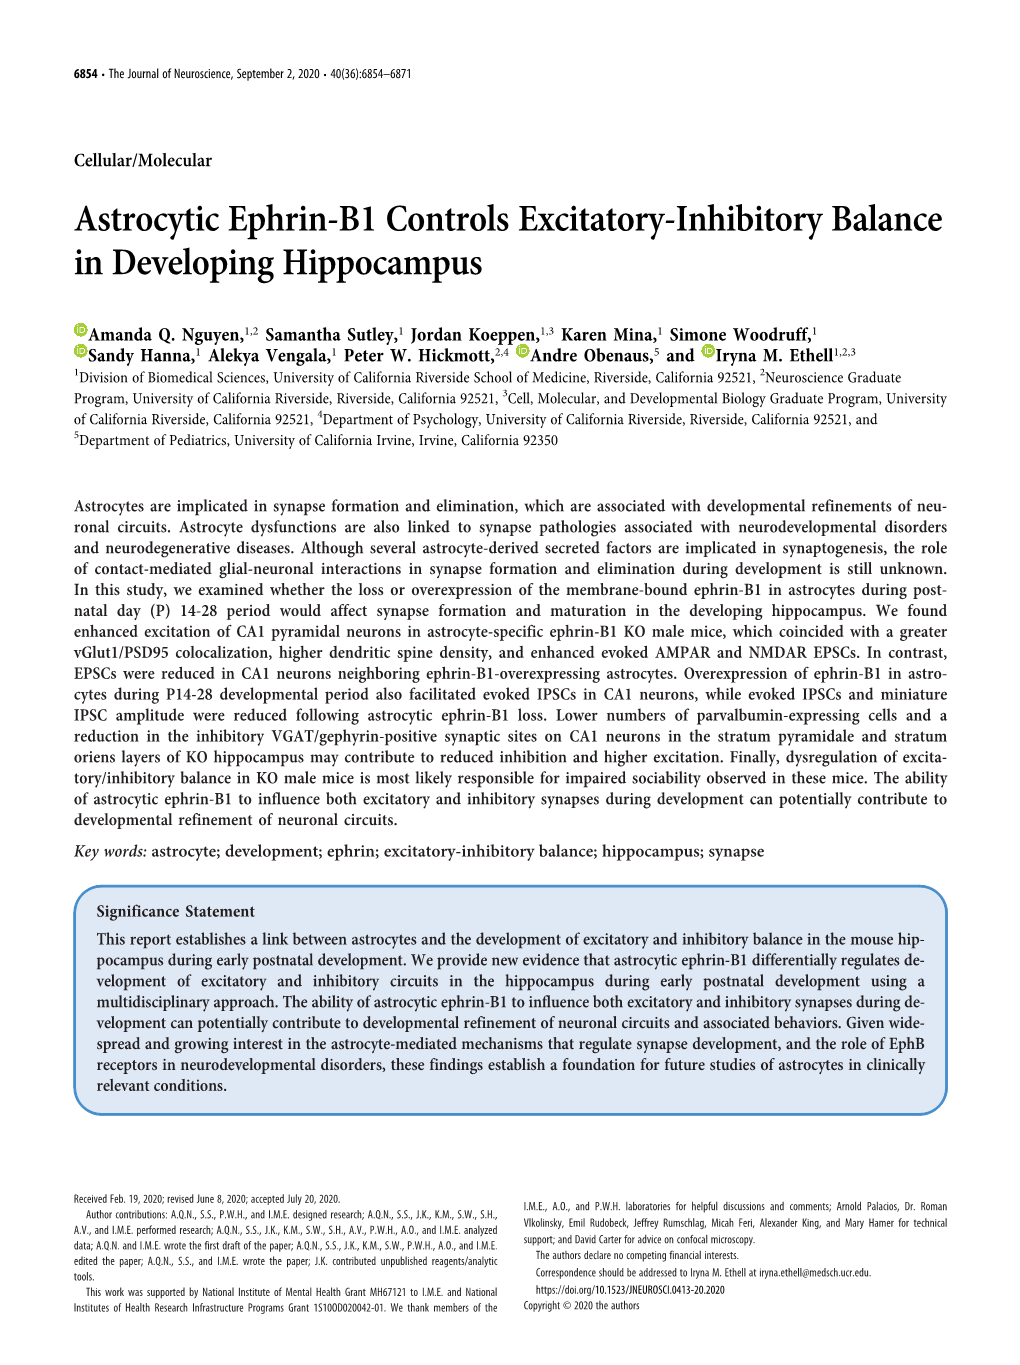 Astrocytic Ephrin-B1 Controls Excitatory-Inhibitory Balance in Developing Hippocampus